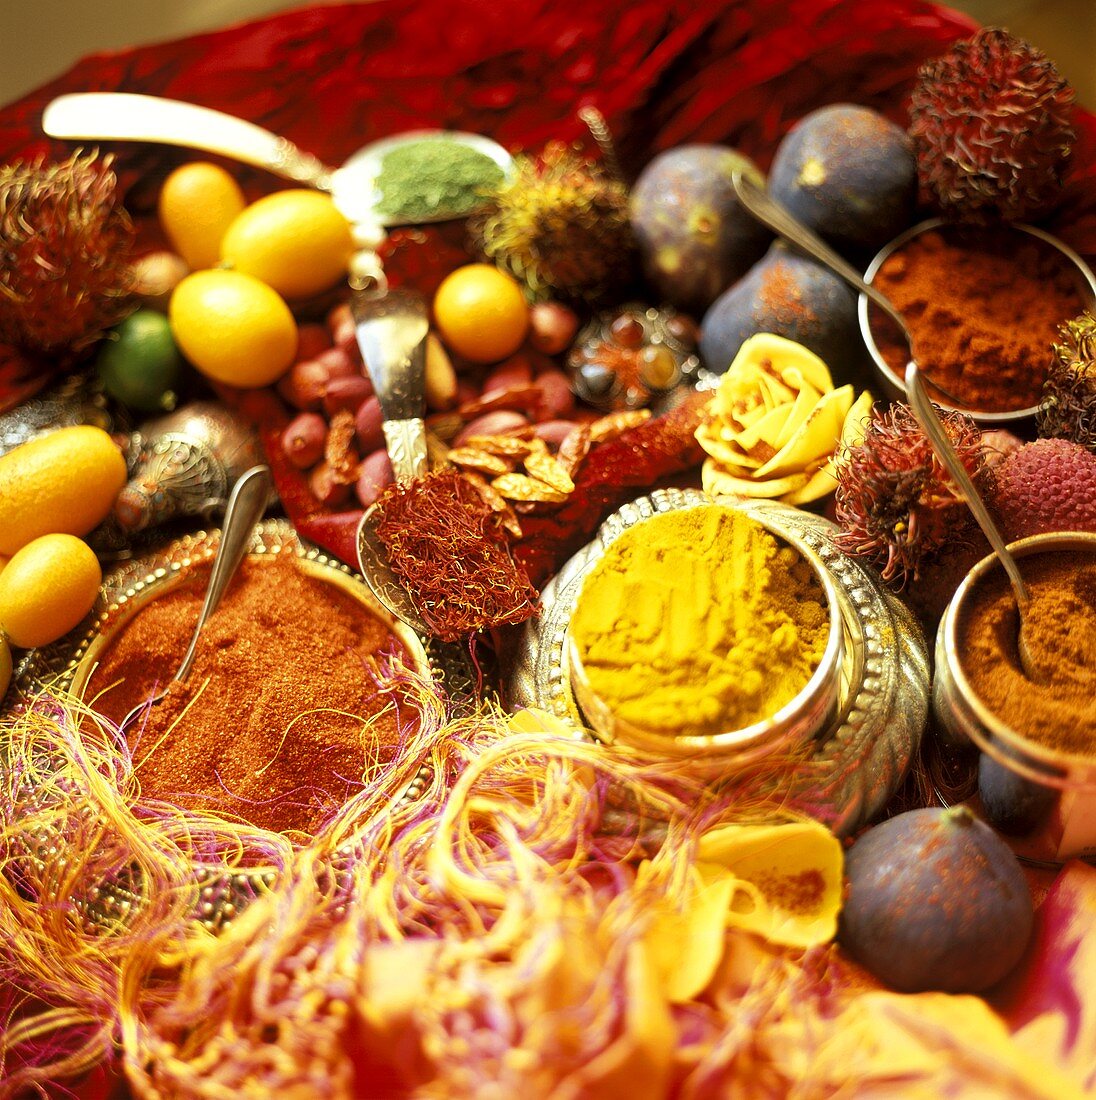 Exotic Spices with Fruit